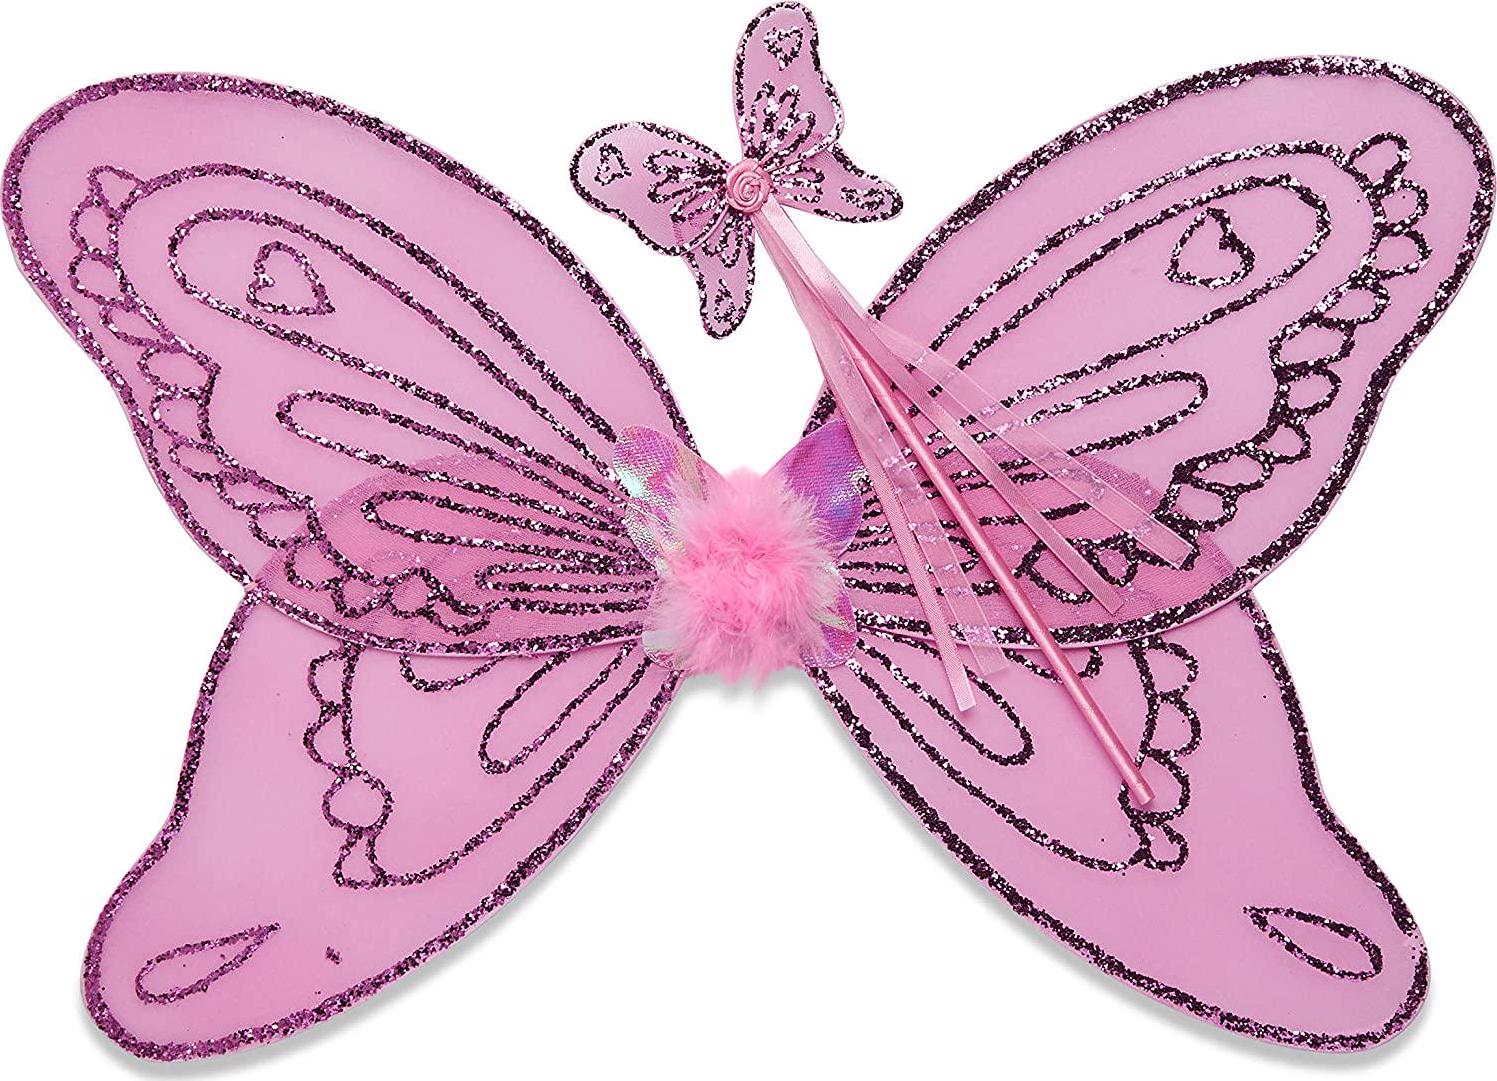 Lucy Locket, Lucy Locket Kids Girls Fairy Wings and Wand Fancy Dress Set Wings for Children (3-10 years) Silver, Gold, Pink, White